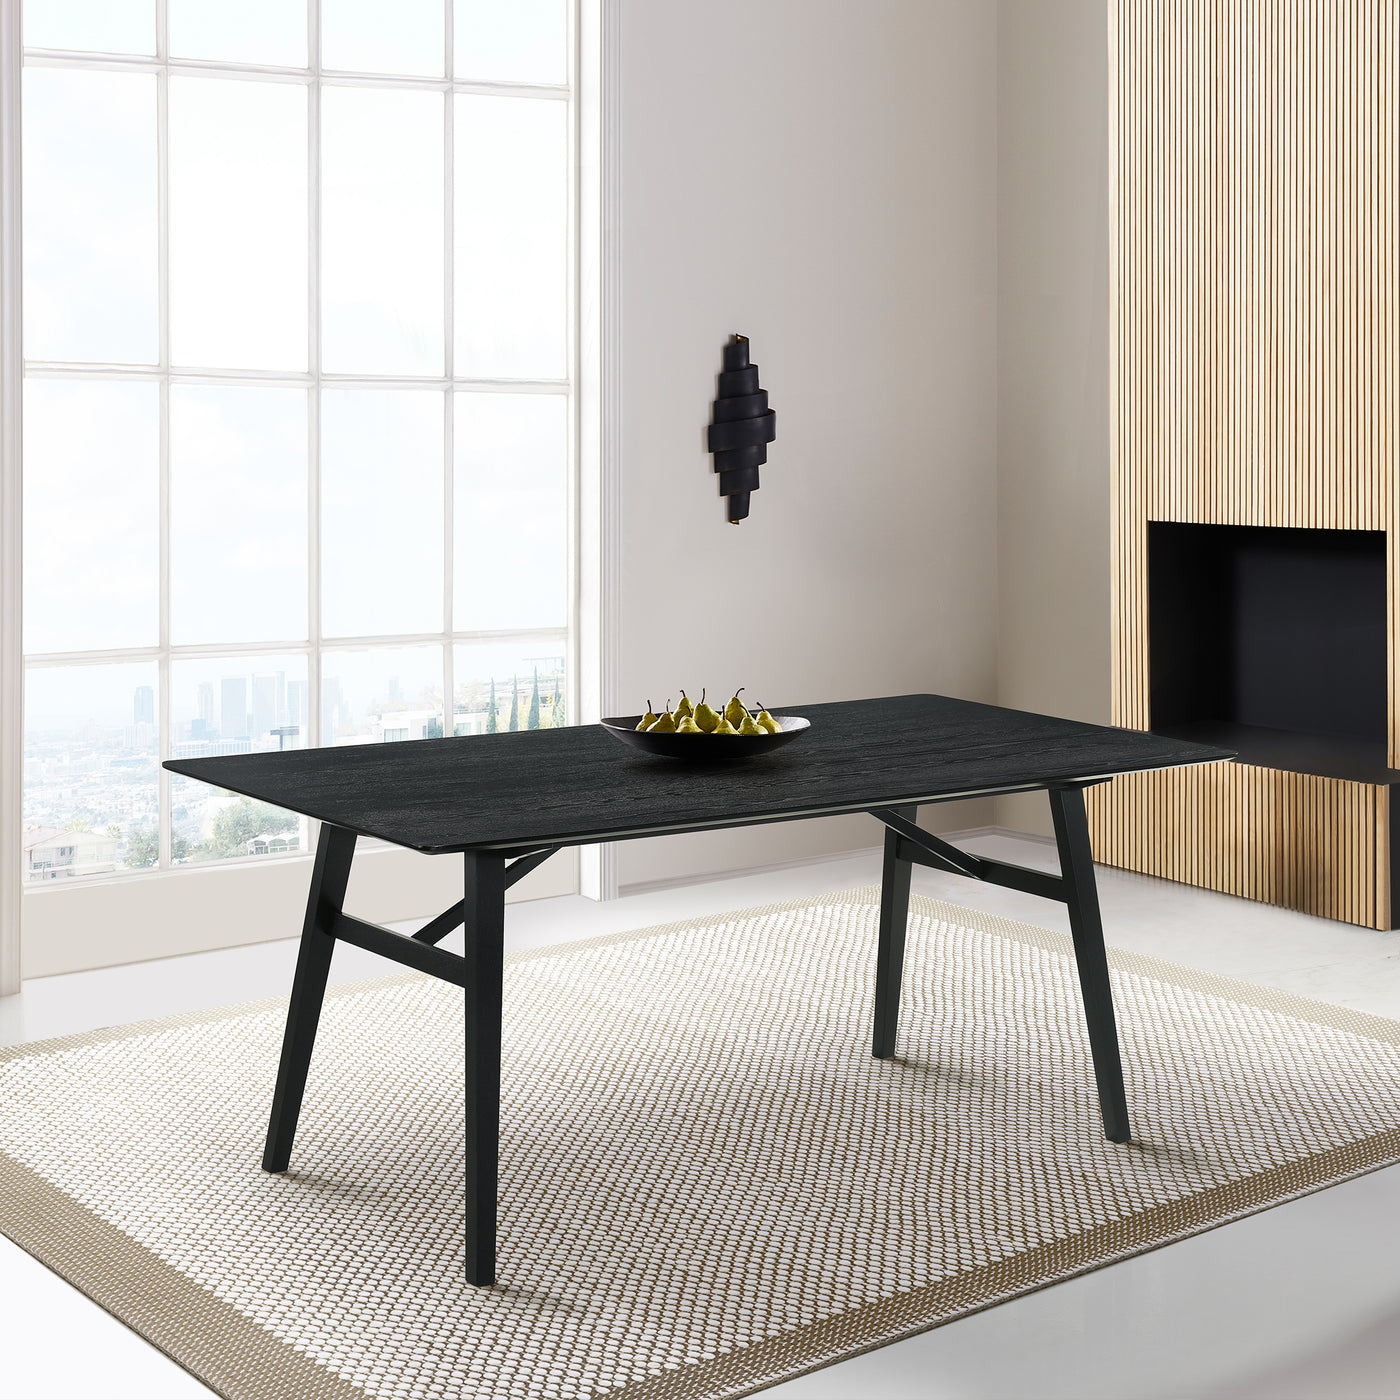 Channell Wood Dining Table